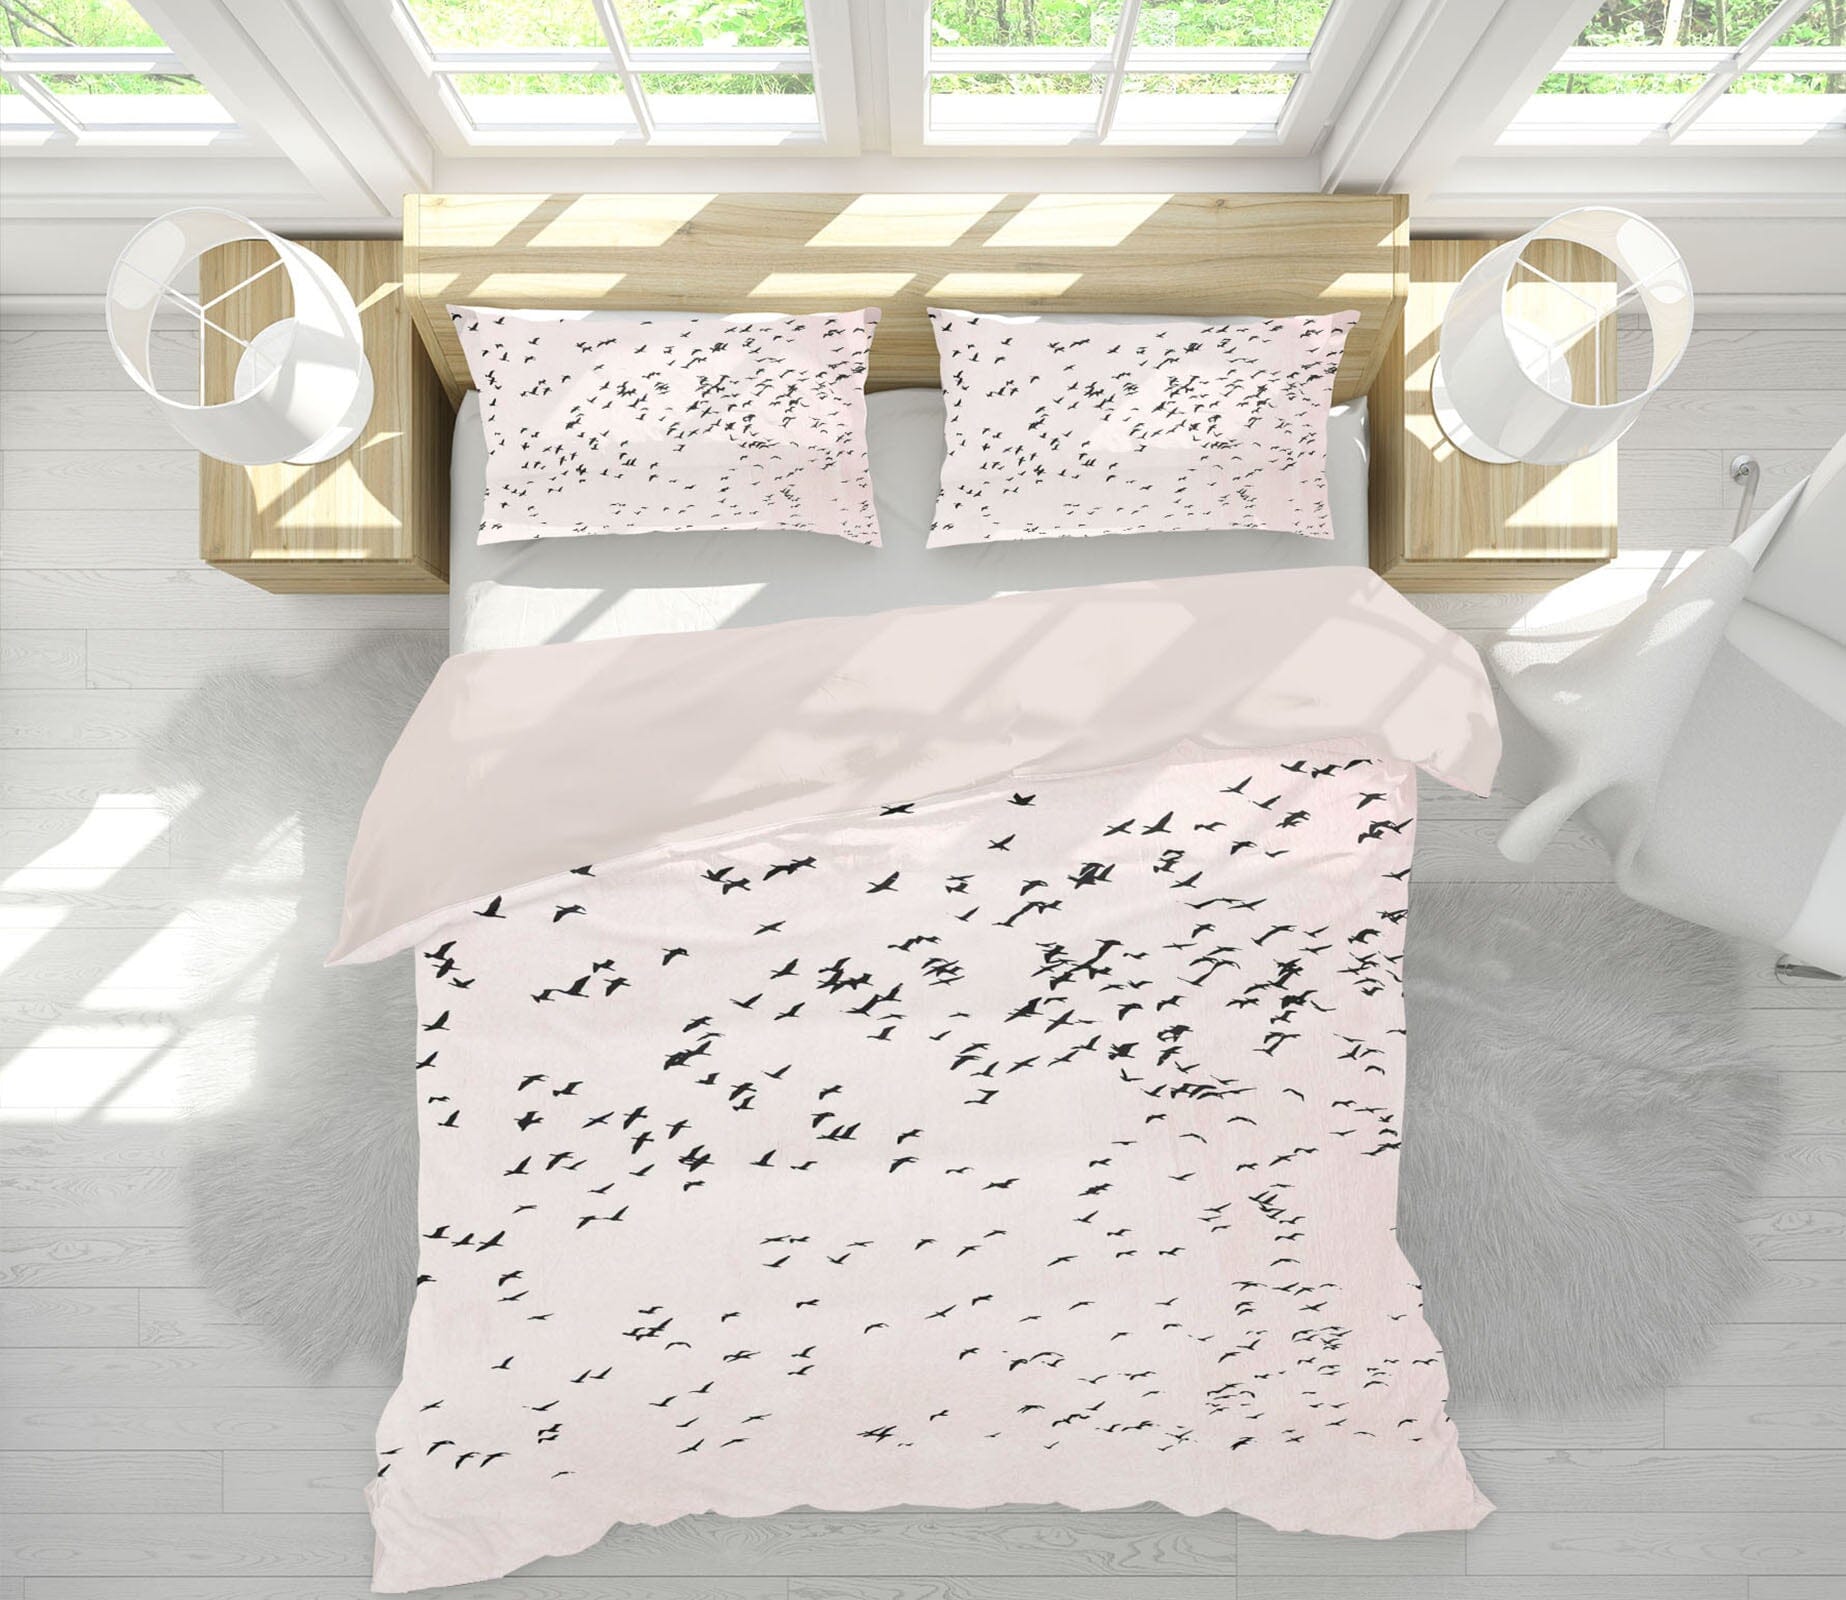 3D Moving On 2108 Boris Draschoff Bedding Bed Pillowcases Quilt Quiet Covers AJ Creativity Home 